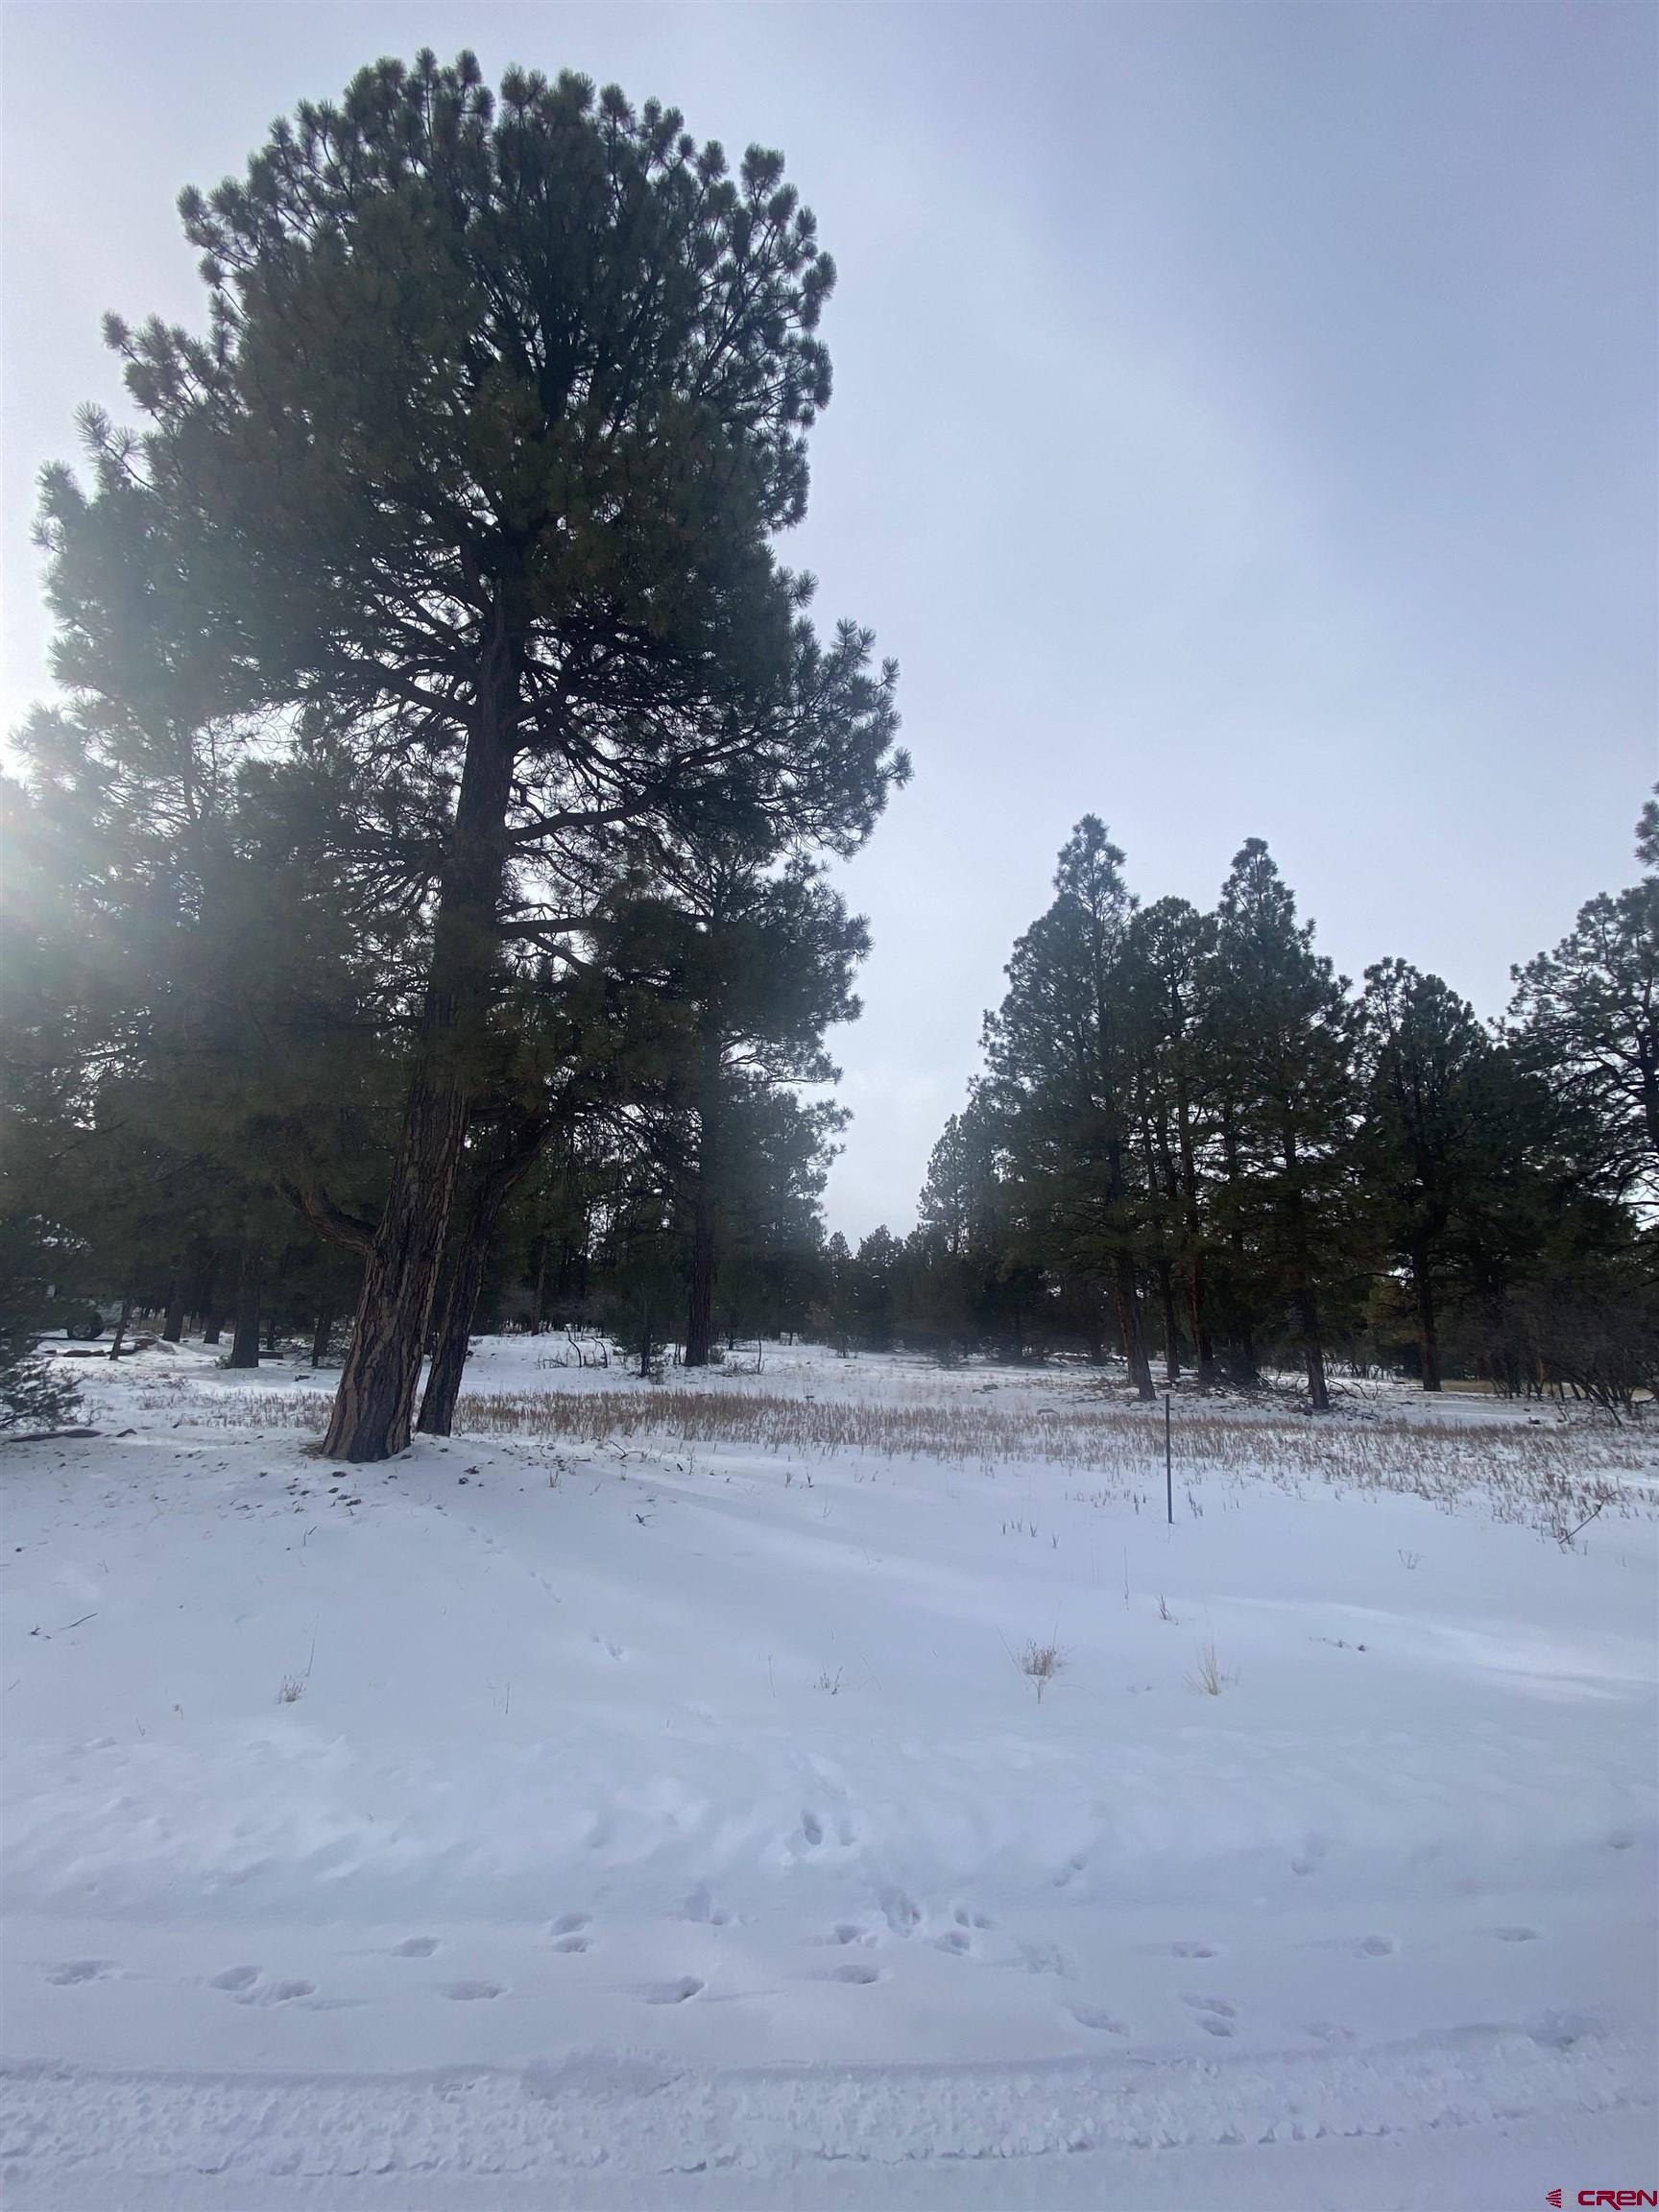 Lovely lot in Divide Ranch and Club. This lot is more towards the exterior portion of the subdivision so you don't have to worry about stray golf balls from the fairway and still enjoy all the amenities of this great golf community. And this location is close to the club house too.  Build your home among the pretty Ponderosa Pine trees which offer shade and relief from the hot summer sun.  Relax on your deck or patio while you enjoy watching the deer that wander through.  Level lot just waiting for your dream home!  Private and peaceful yet just 10 minutes to the Town of Ridgway, 30 minutes to Montrose with the recently improved Regional Airport and 45 minutes to world class skiing in Telluride. Come realize your dream of owning property and building a home in Southwestern Colorado!